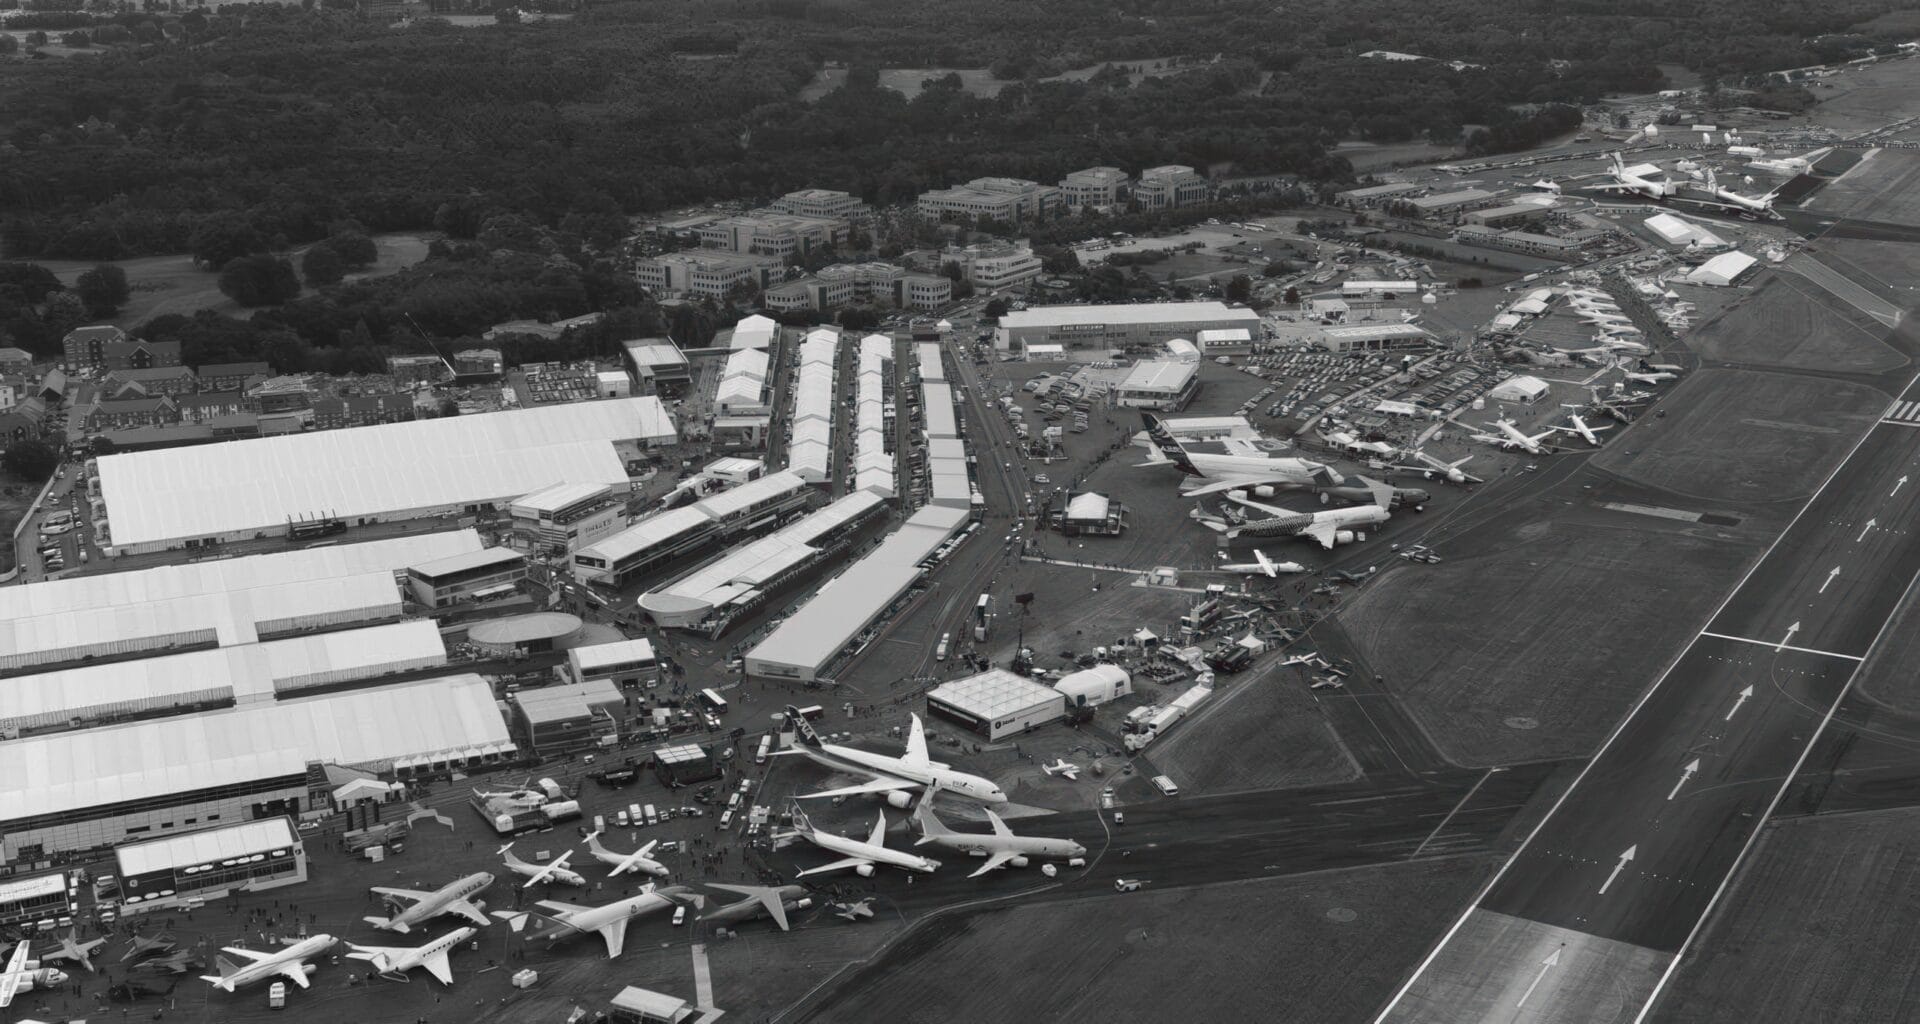 Aerial image of farnborough airport during the Farnborough airshow with airplanes on the ramp